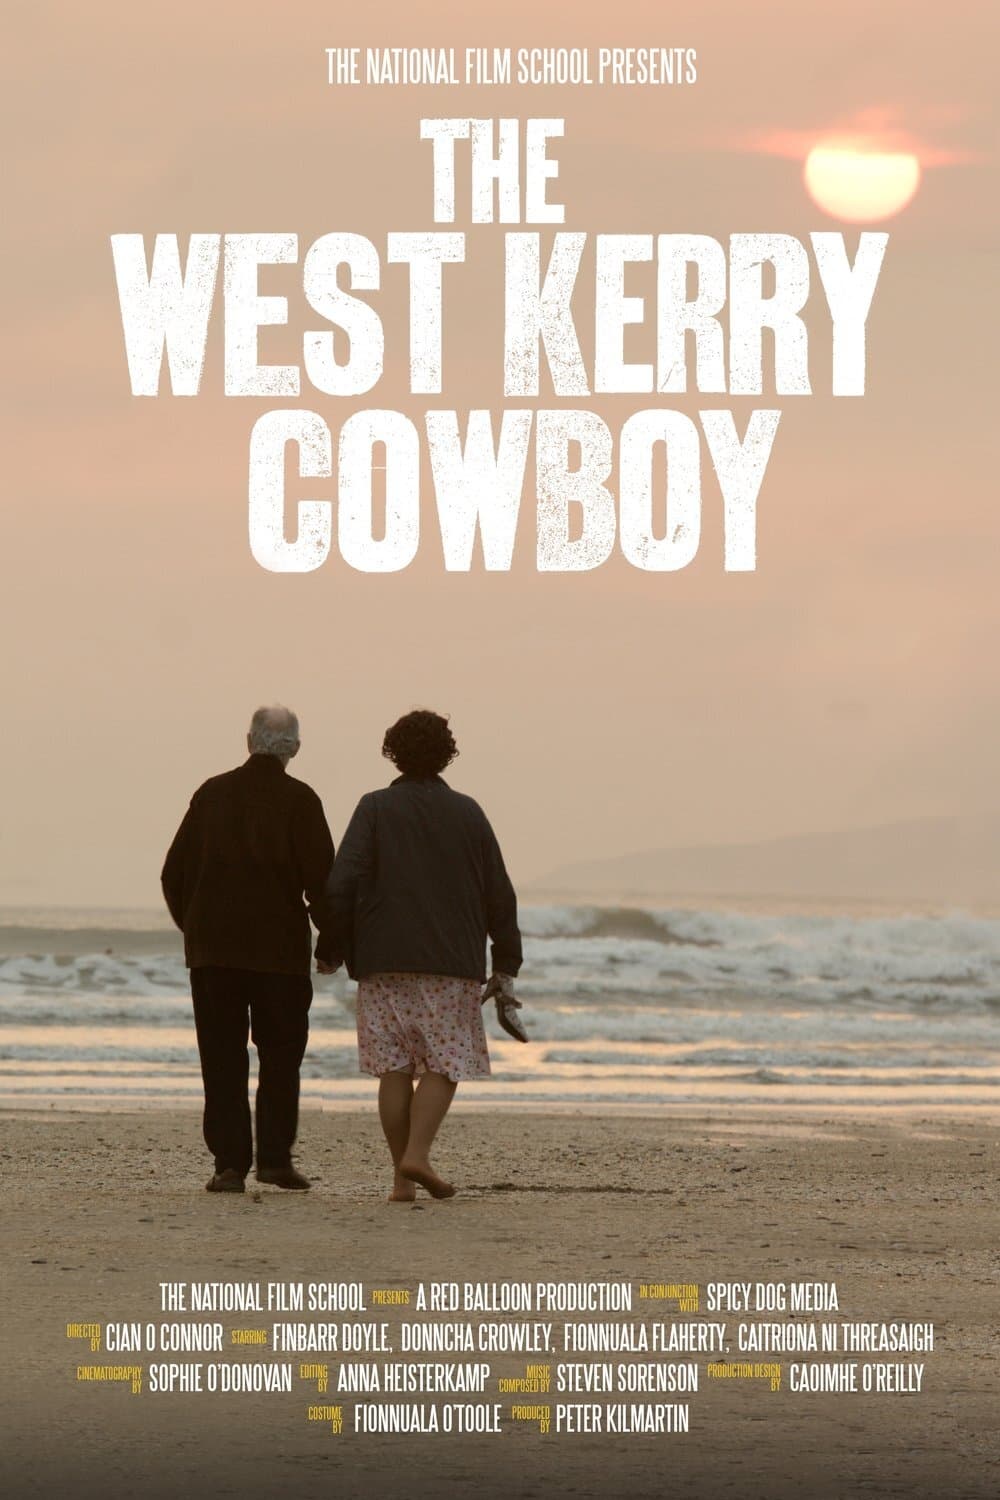 The West Kerry Cowboy